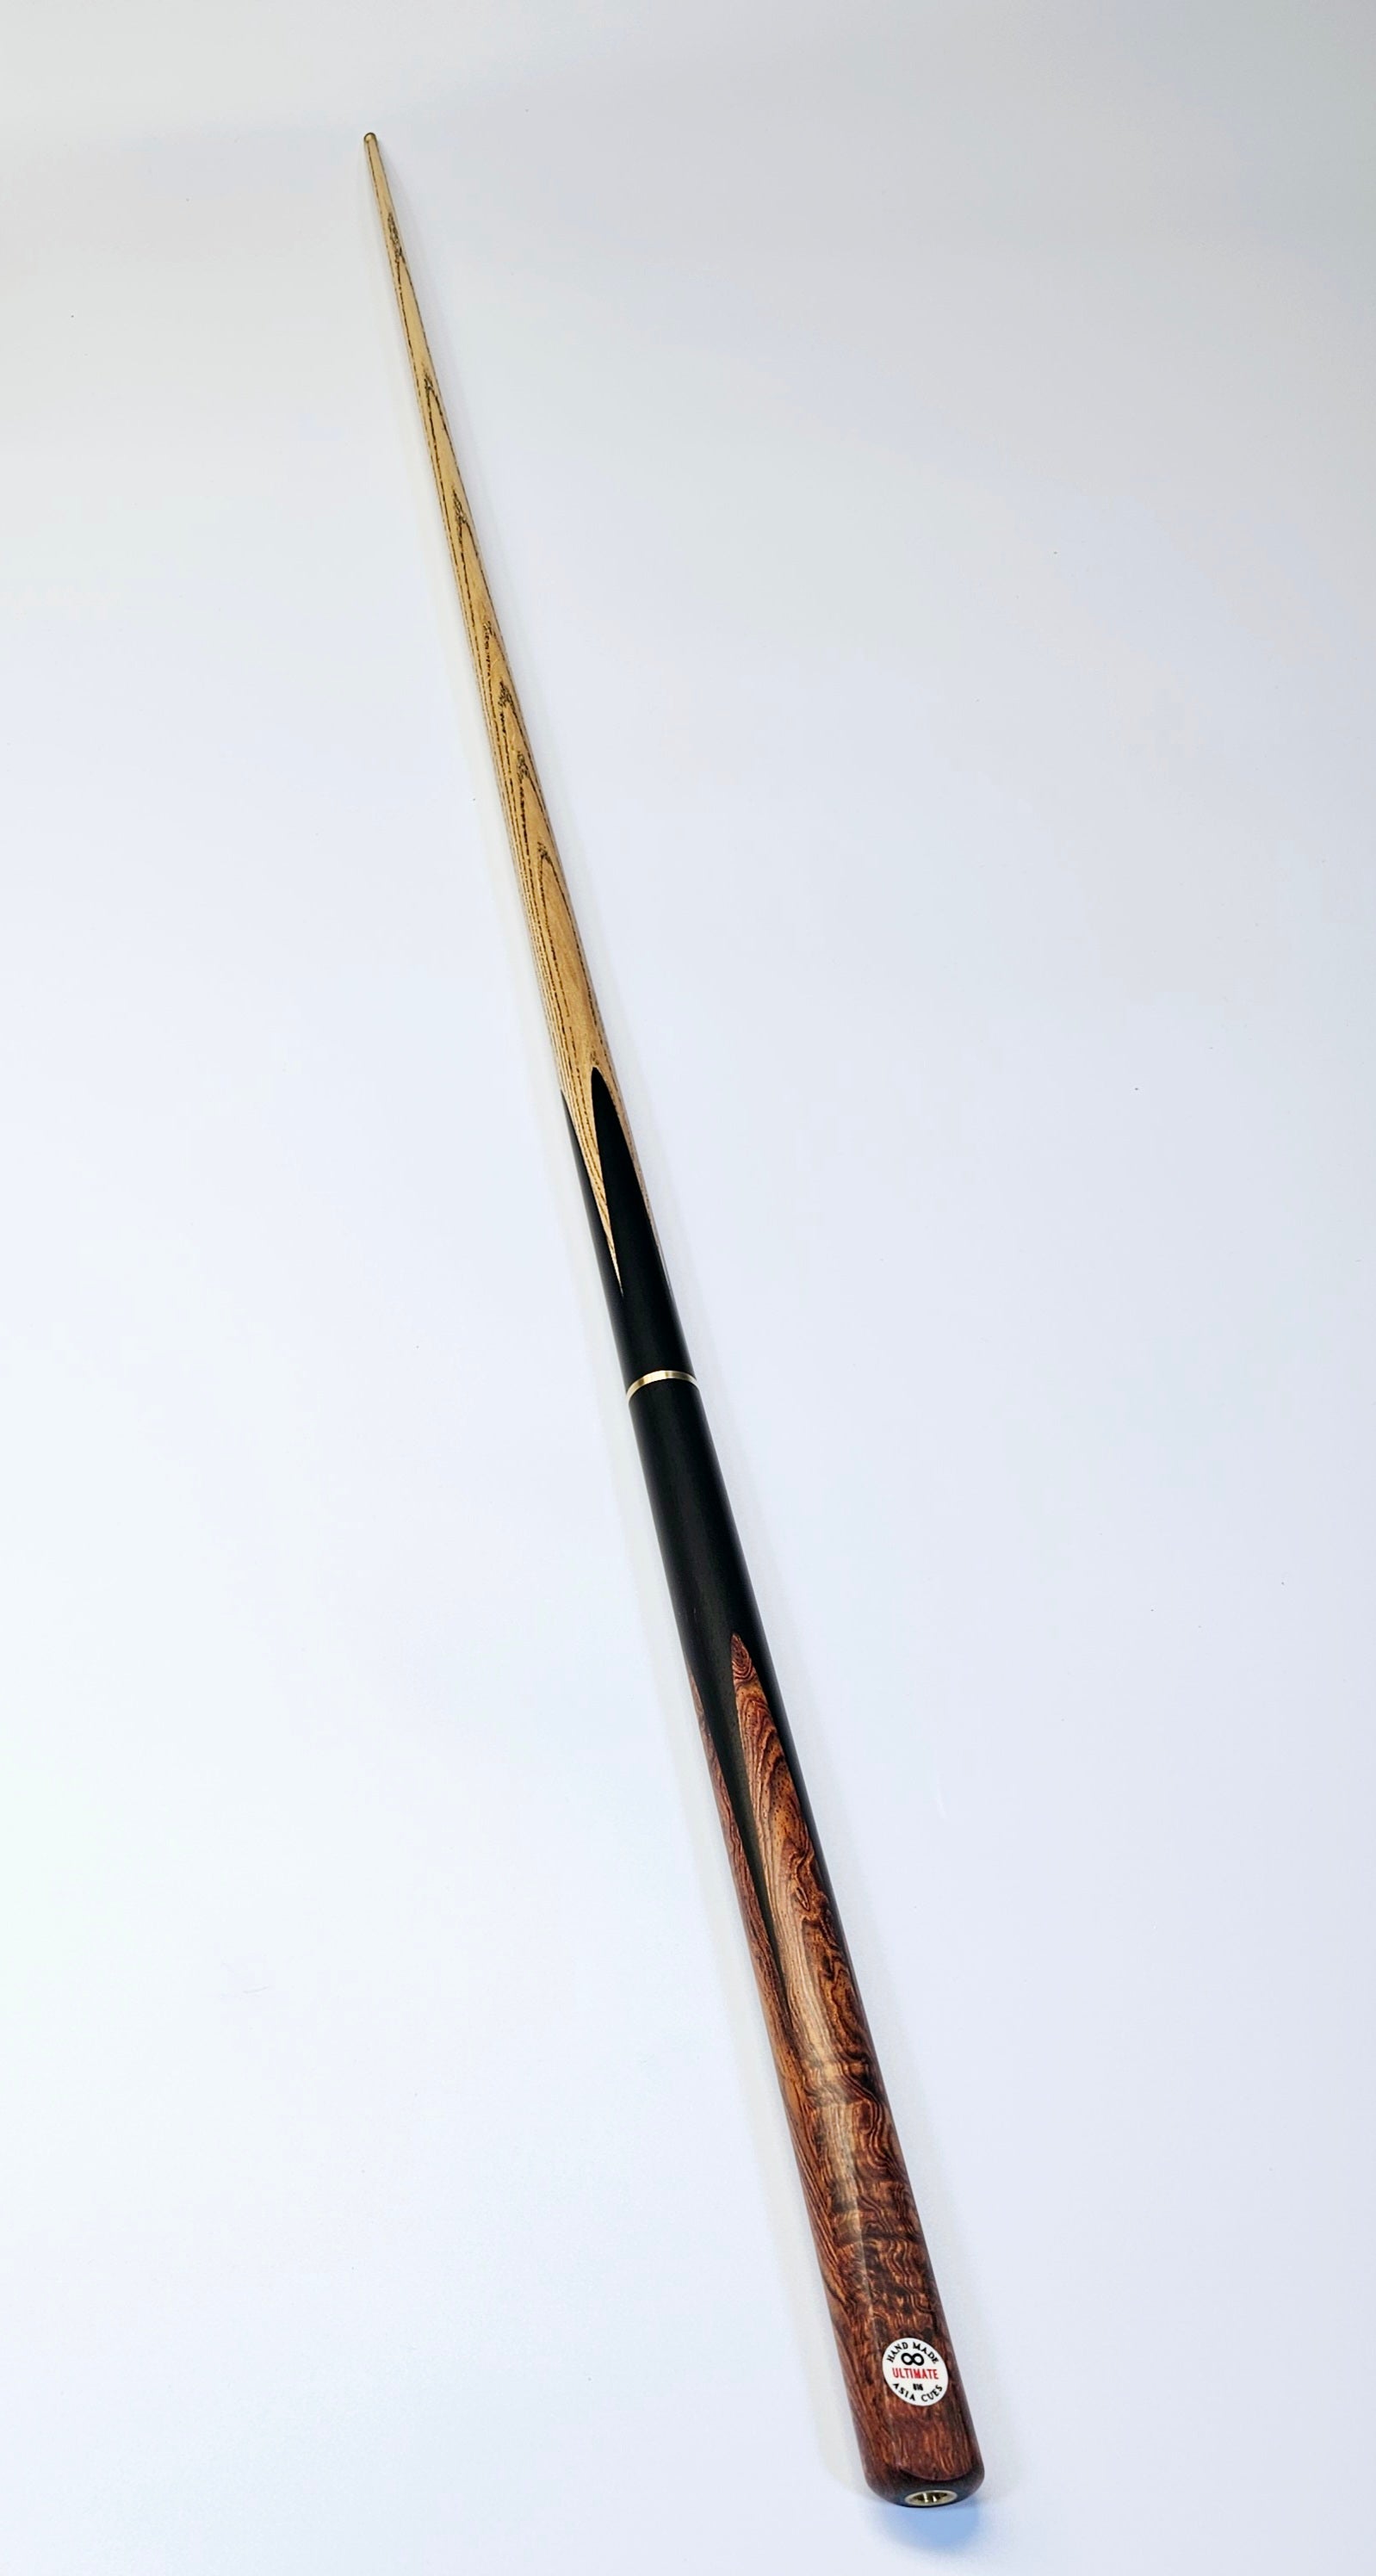 Asia Cues Ultimate No.816  - 3/4 Jointed Snooker Cue 9.3mm Tip, 17.8oz, 58"